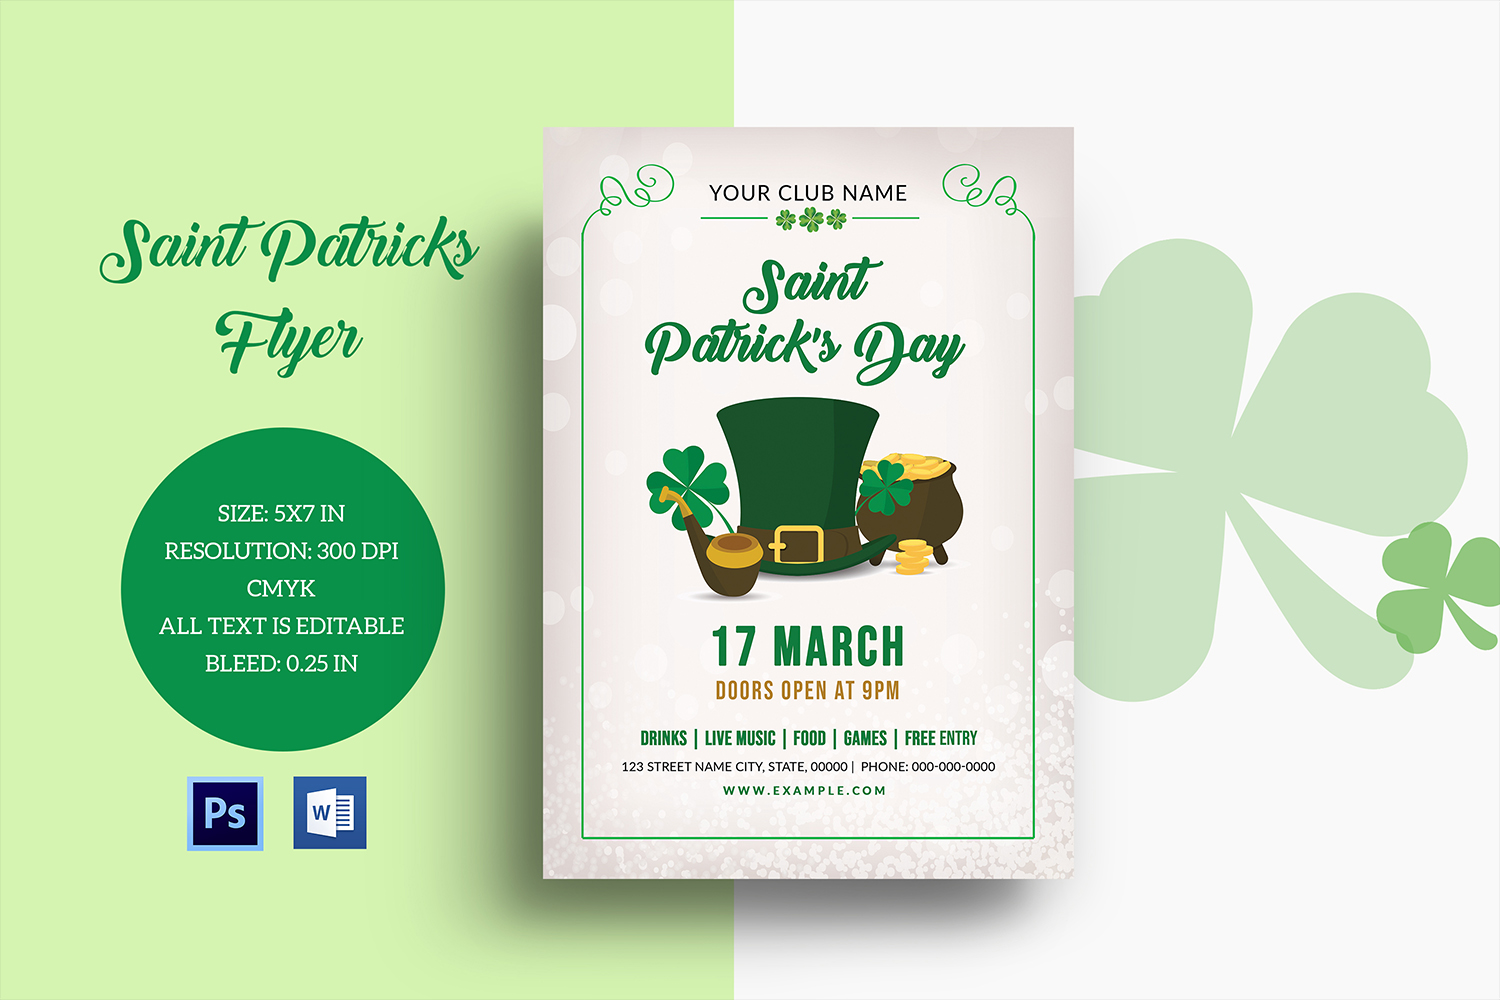 Template #311907 Day Pattrick Webdesign Template - Logo template Preview